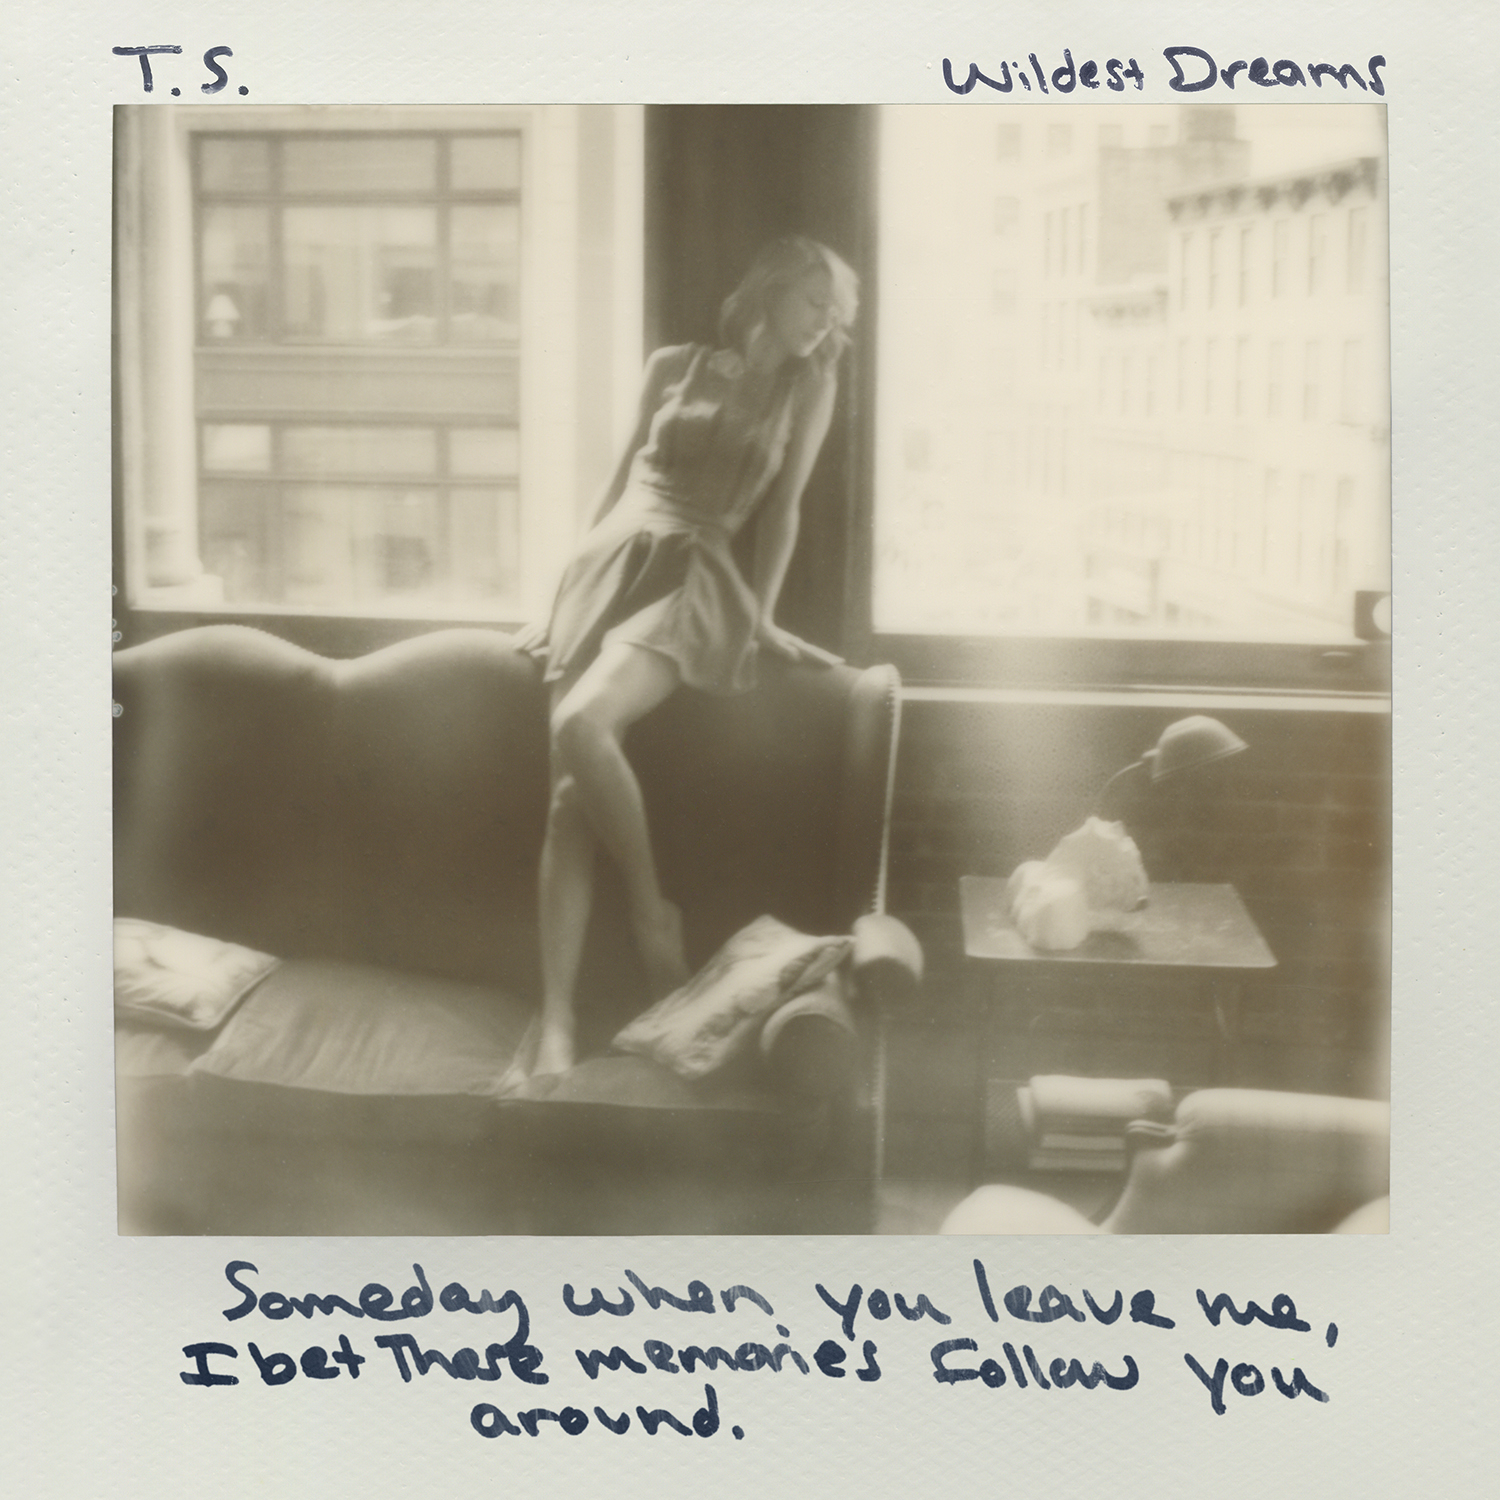 Taylor Swift Wildest Dreams cover artwork